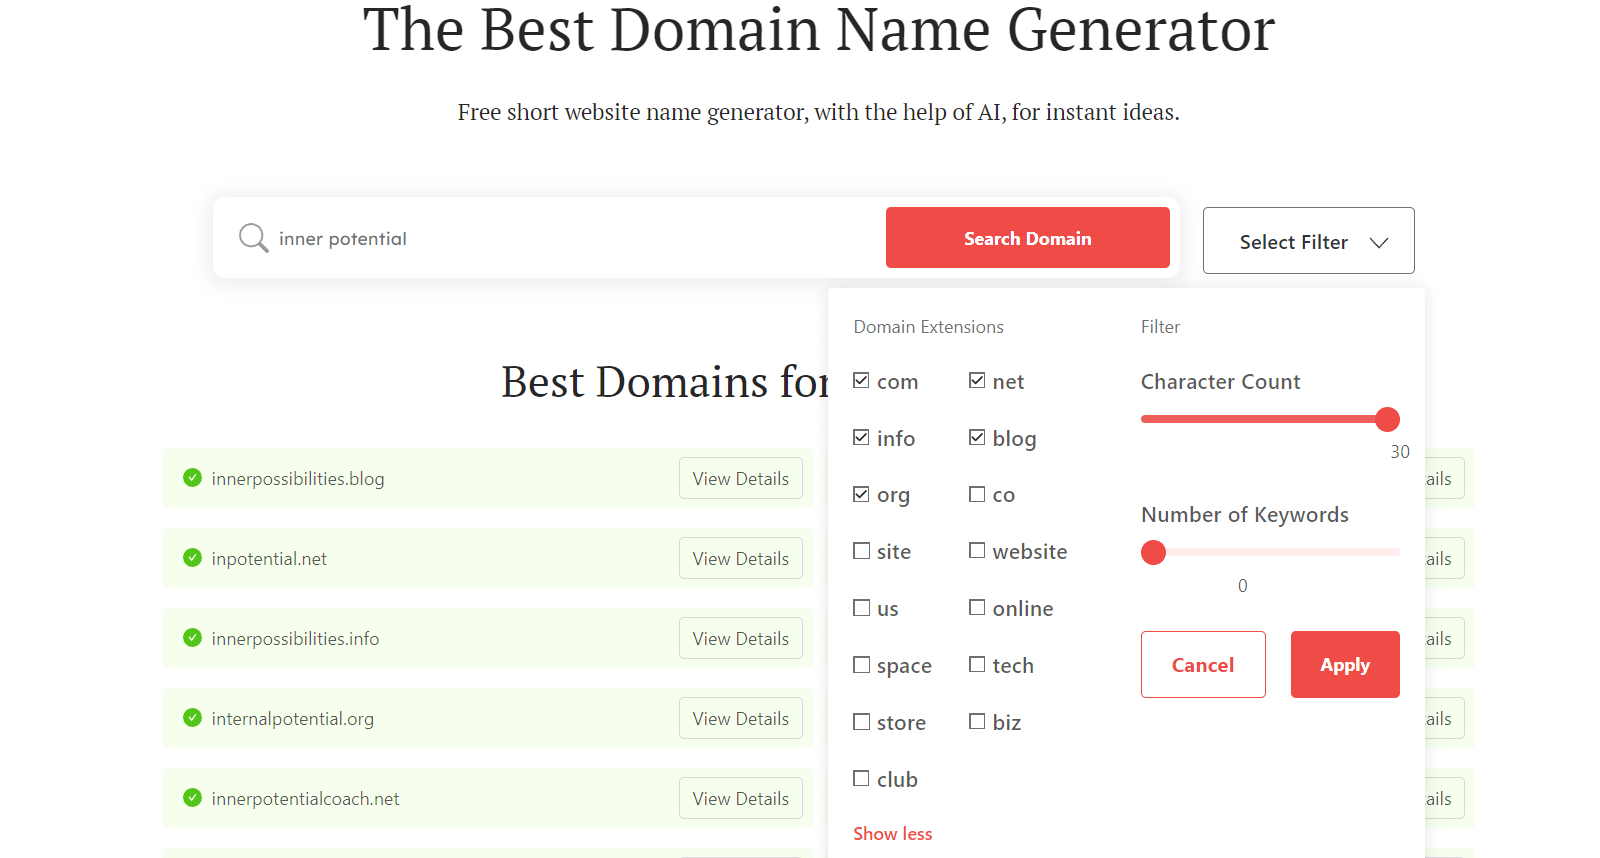 DomainWheel life coach business name generator search filters for domain extensions, character count, and number of keywords